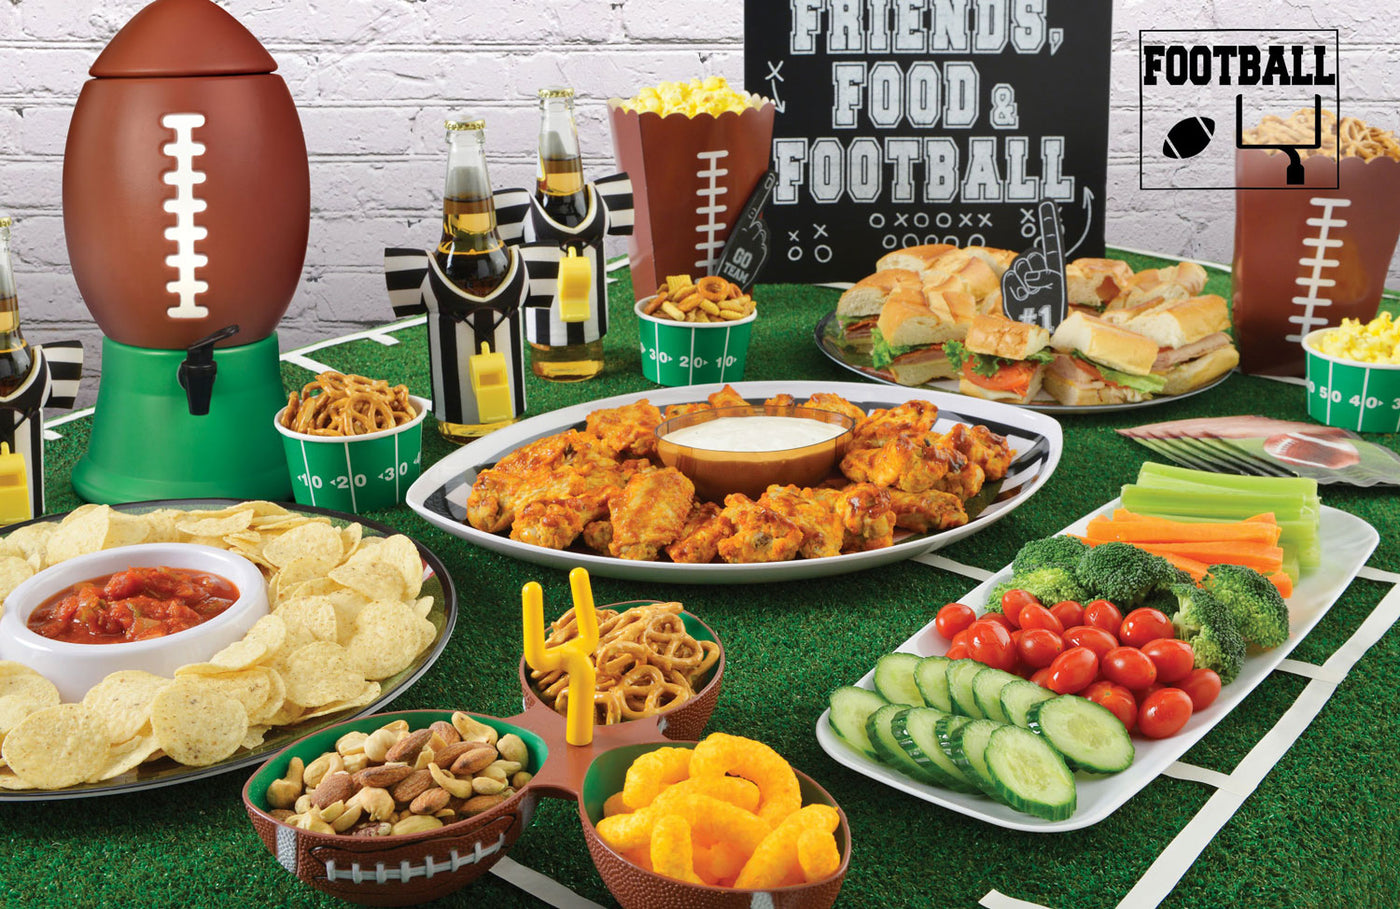 Pic of a table setting for a football party.  The table setting features various football themes table and serving ware with logs of different snacks.  This Table is ready for the big football game party.